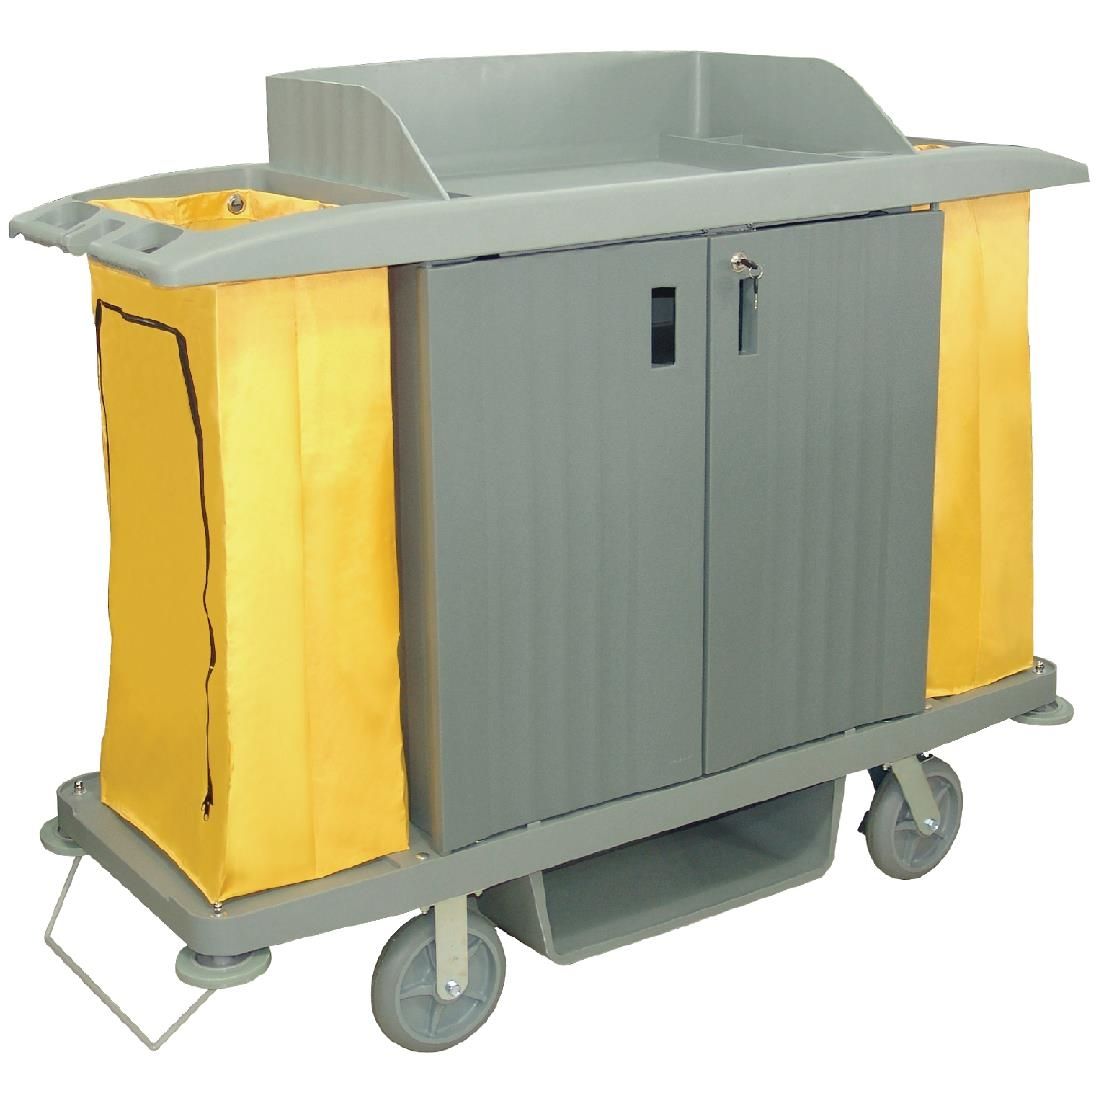 Jantex Housekeeping Trolley With Doors JD Catering Equipment Solutions Ltd